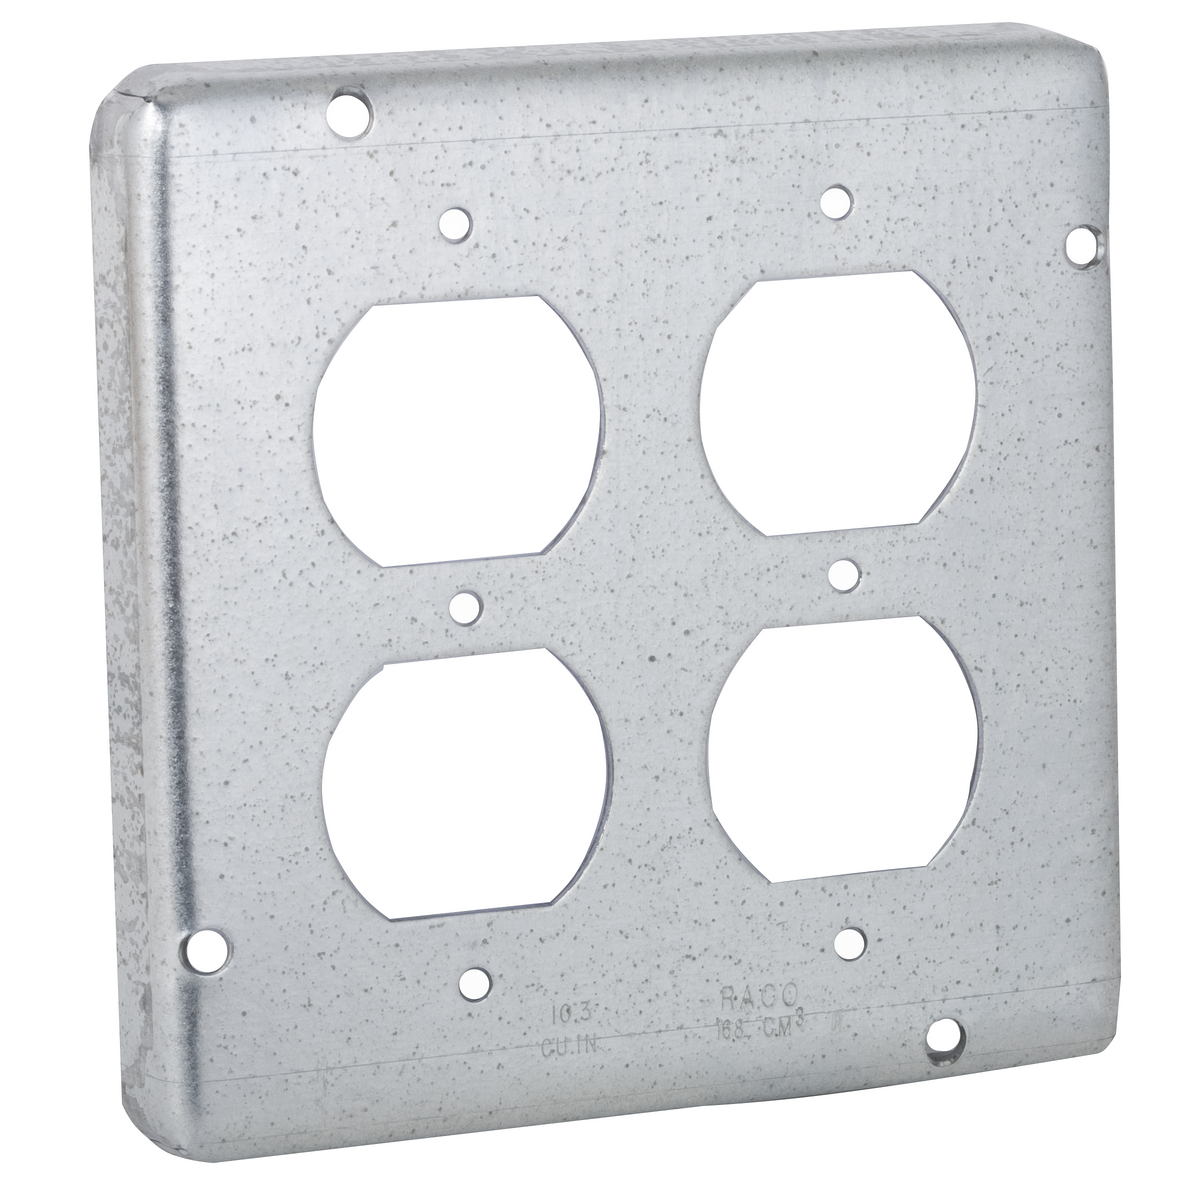 RACO 979 4-11/16" SQUARE EXPOSED WORK COVER, 2 DUPLEX RECEPTACLES